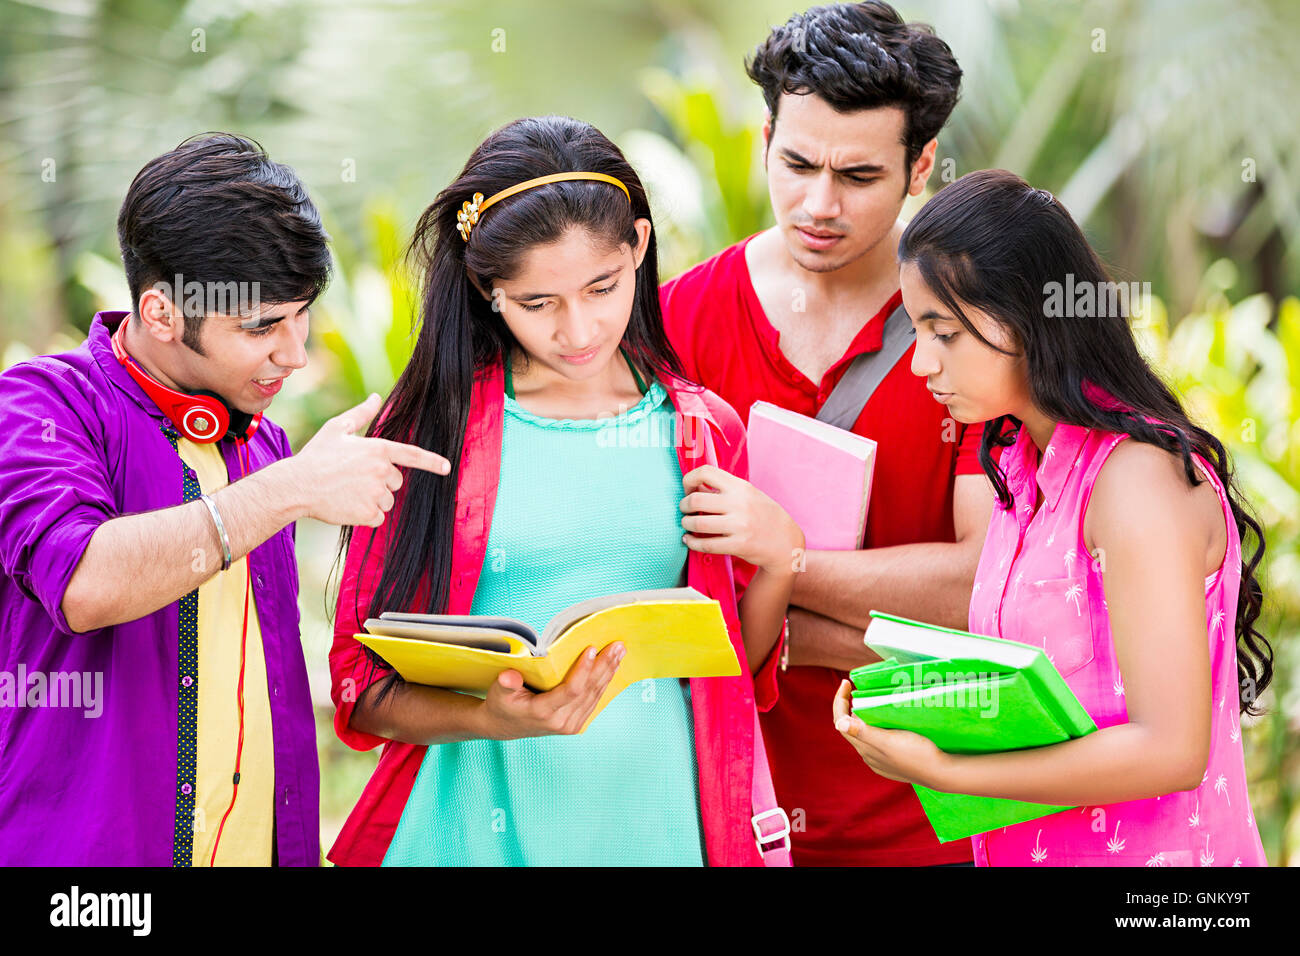 5 Young Girls and Boys Friends College Student Park Standing  Book Studying Stock Photo